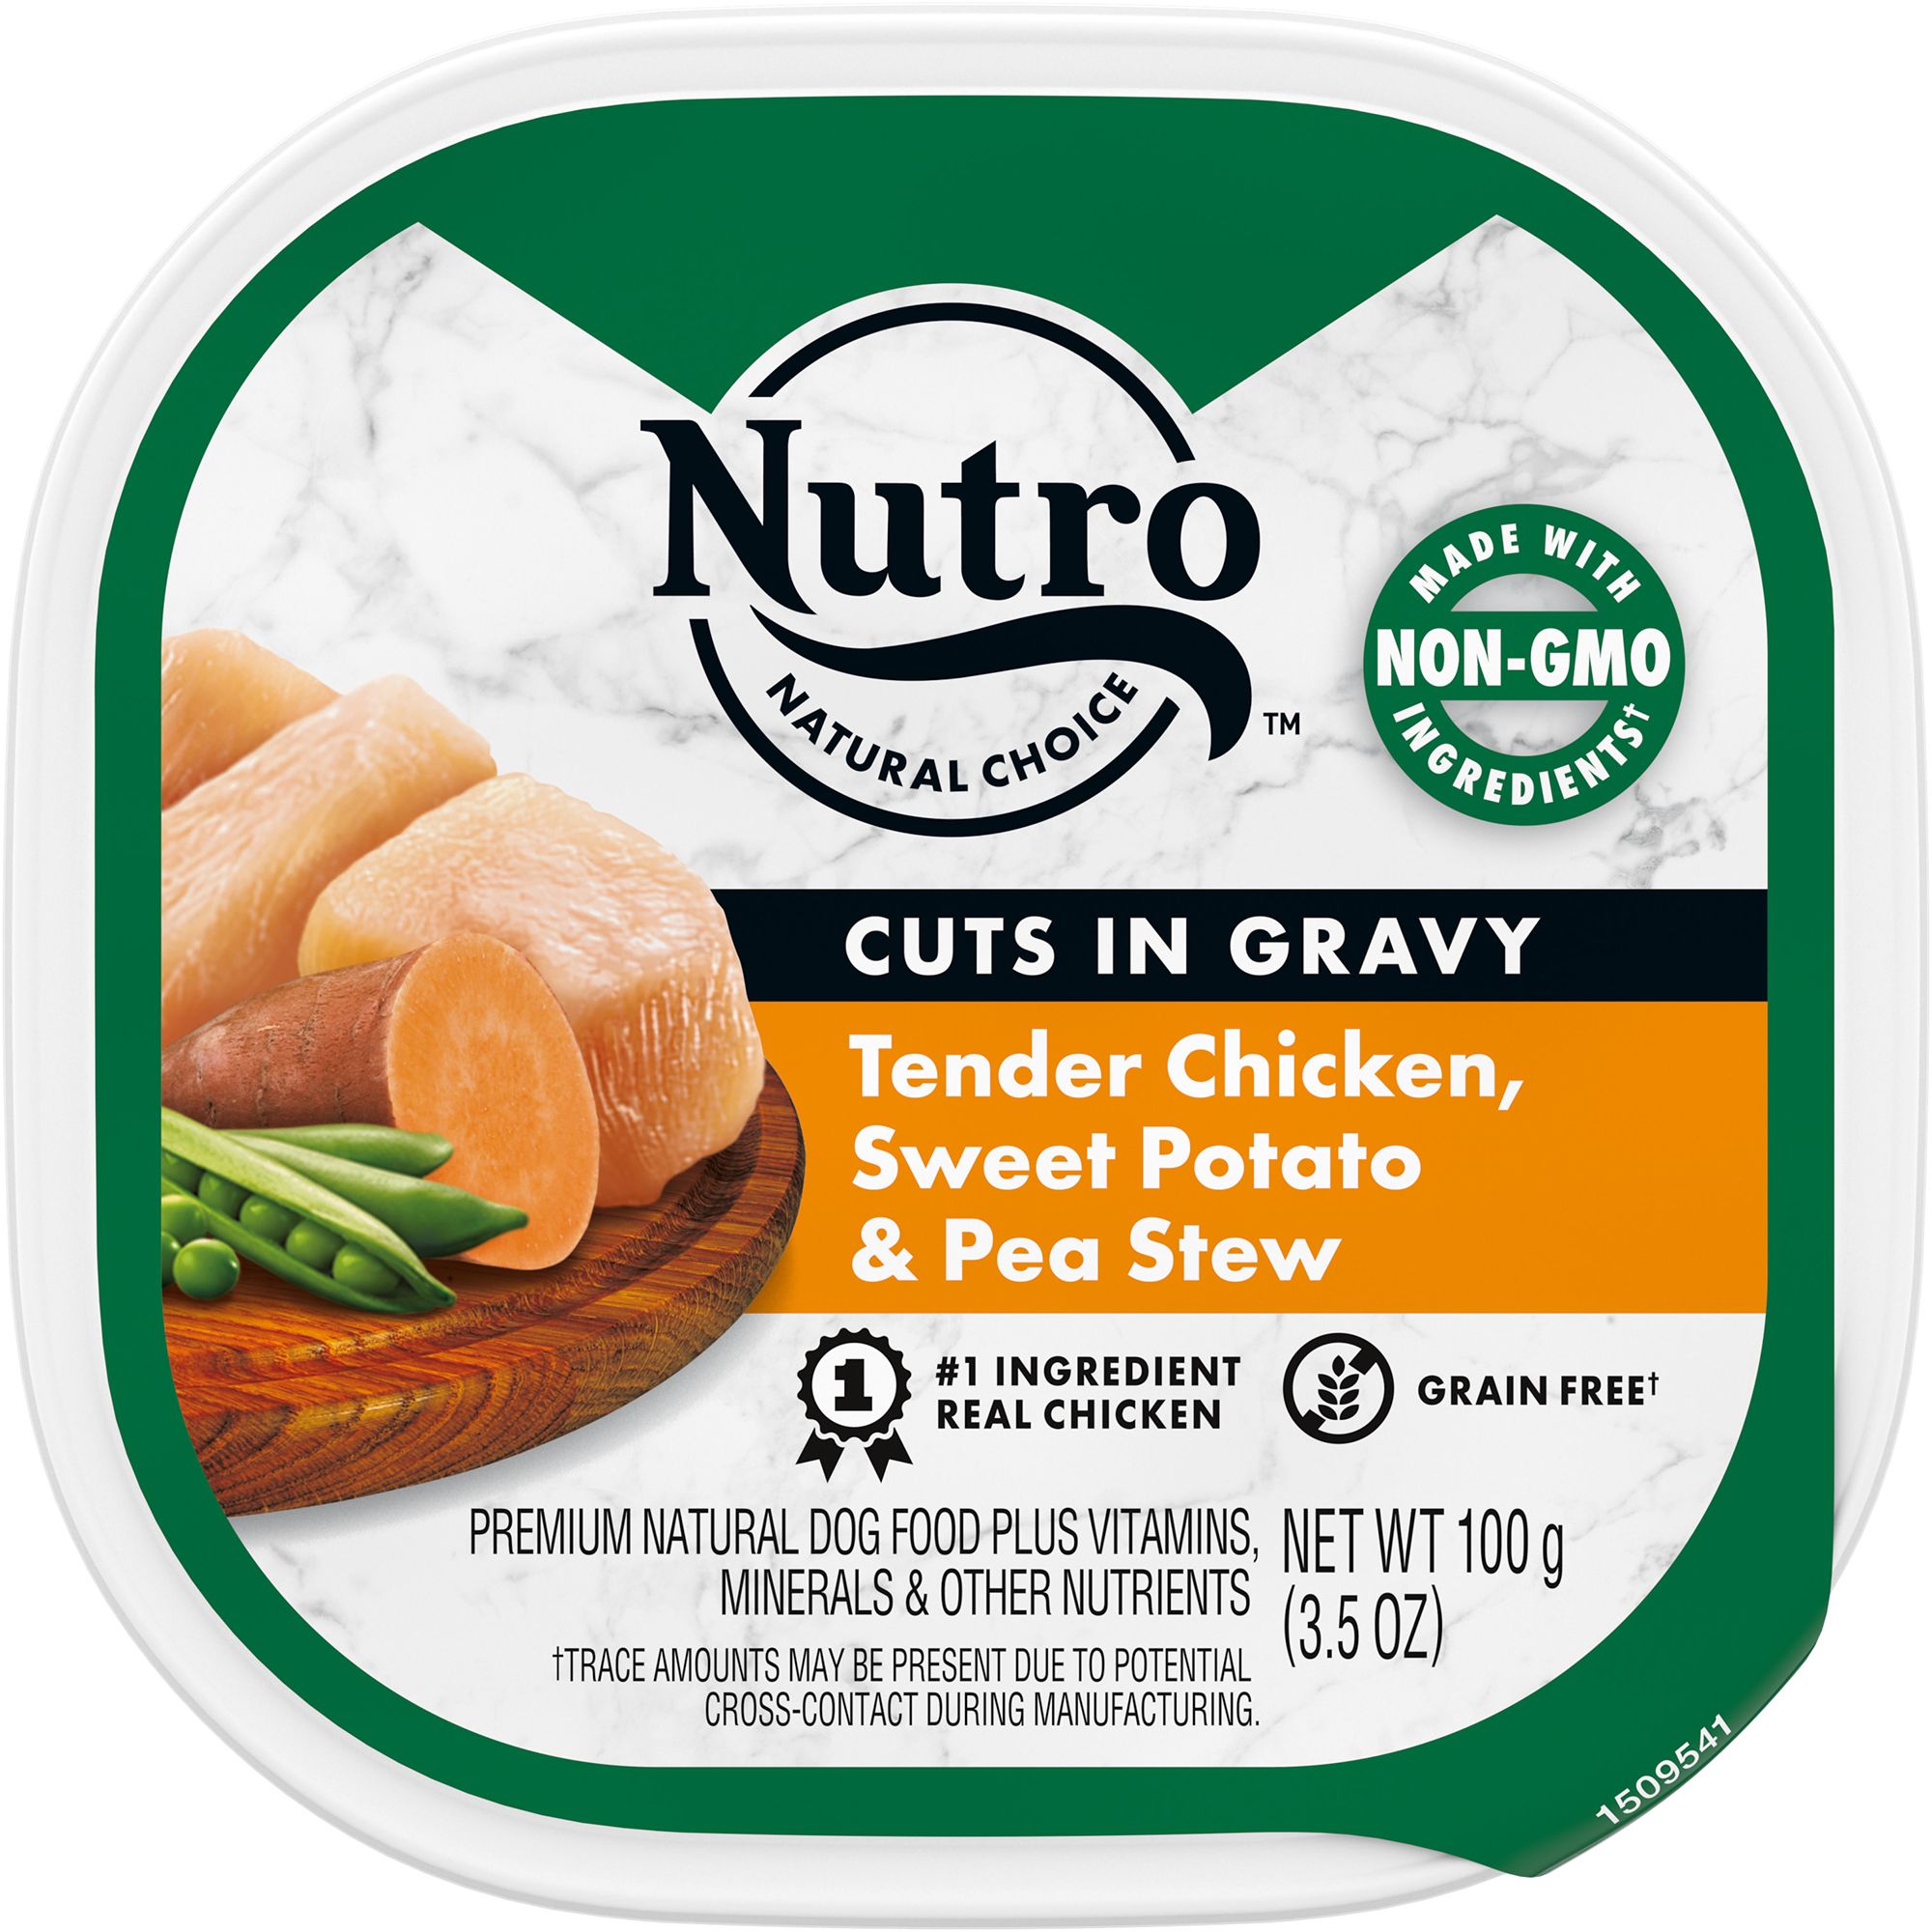 nutro-natural-choice-cuts-in-gravy-adult-wet-dog-food-non-gmo-3-5oz